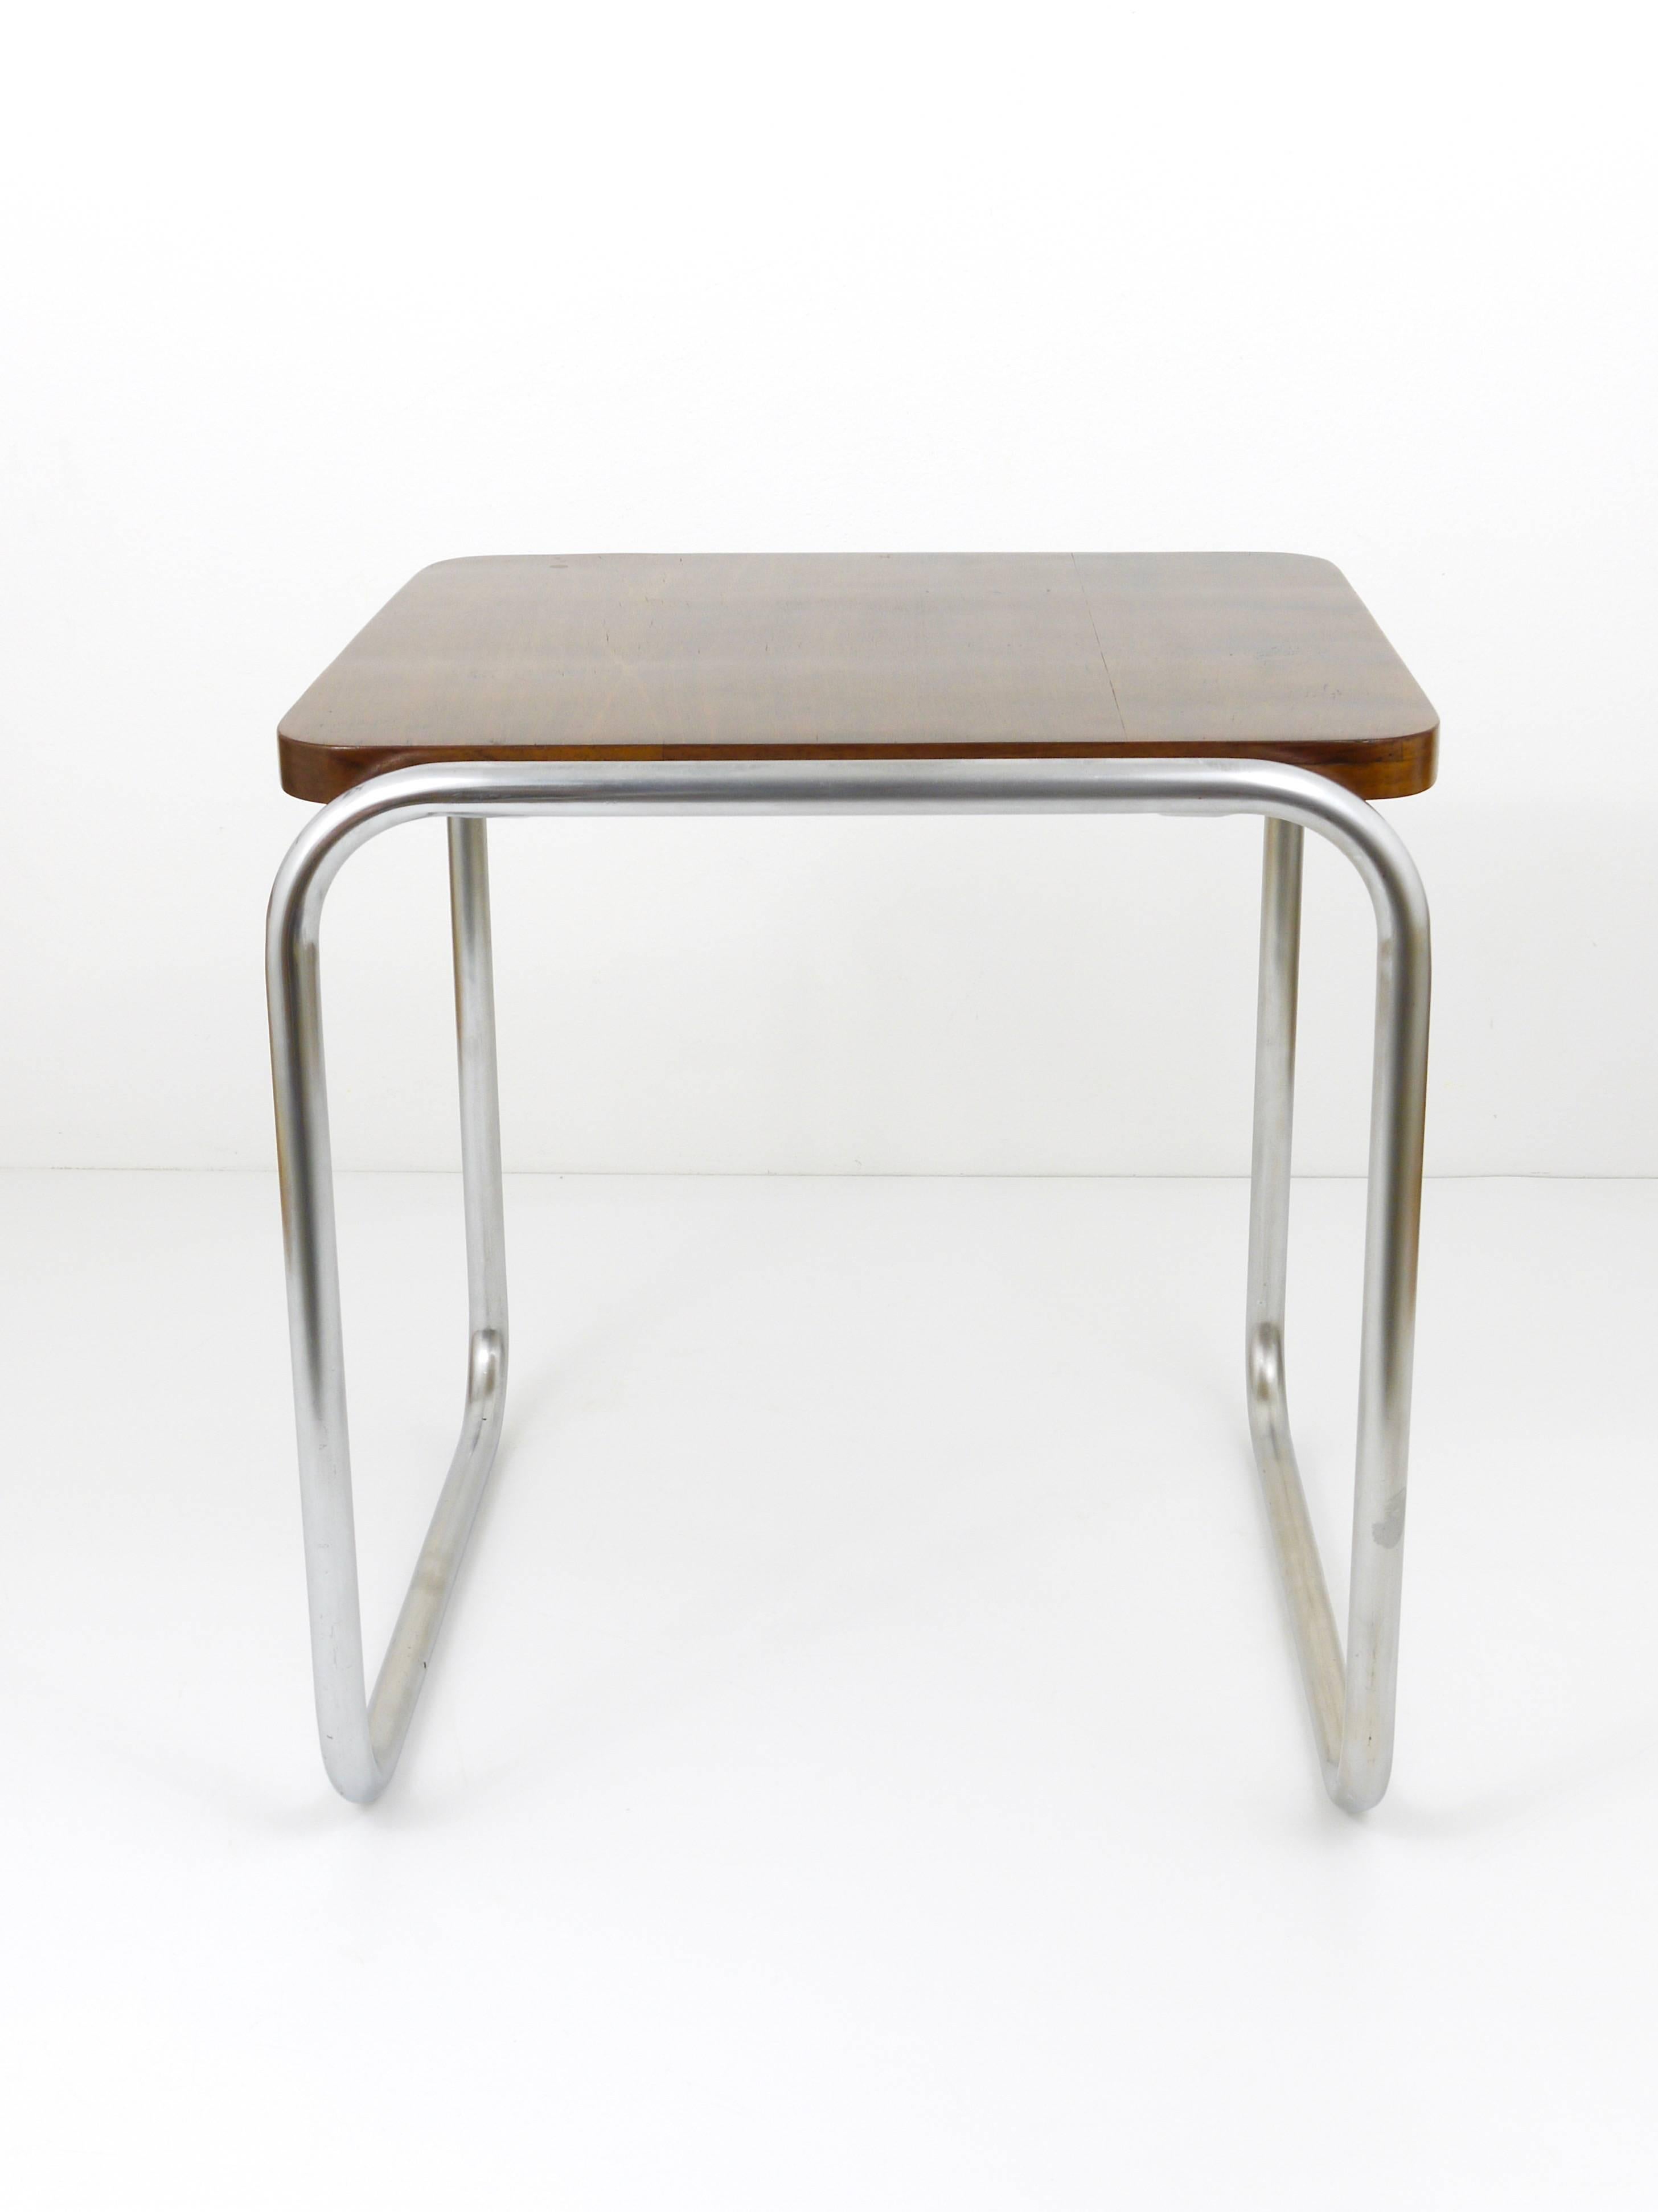 A beautiful tubular steel Bauhaus occasional table or stool, Germany, 1930s in very good condition.